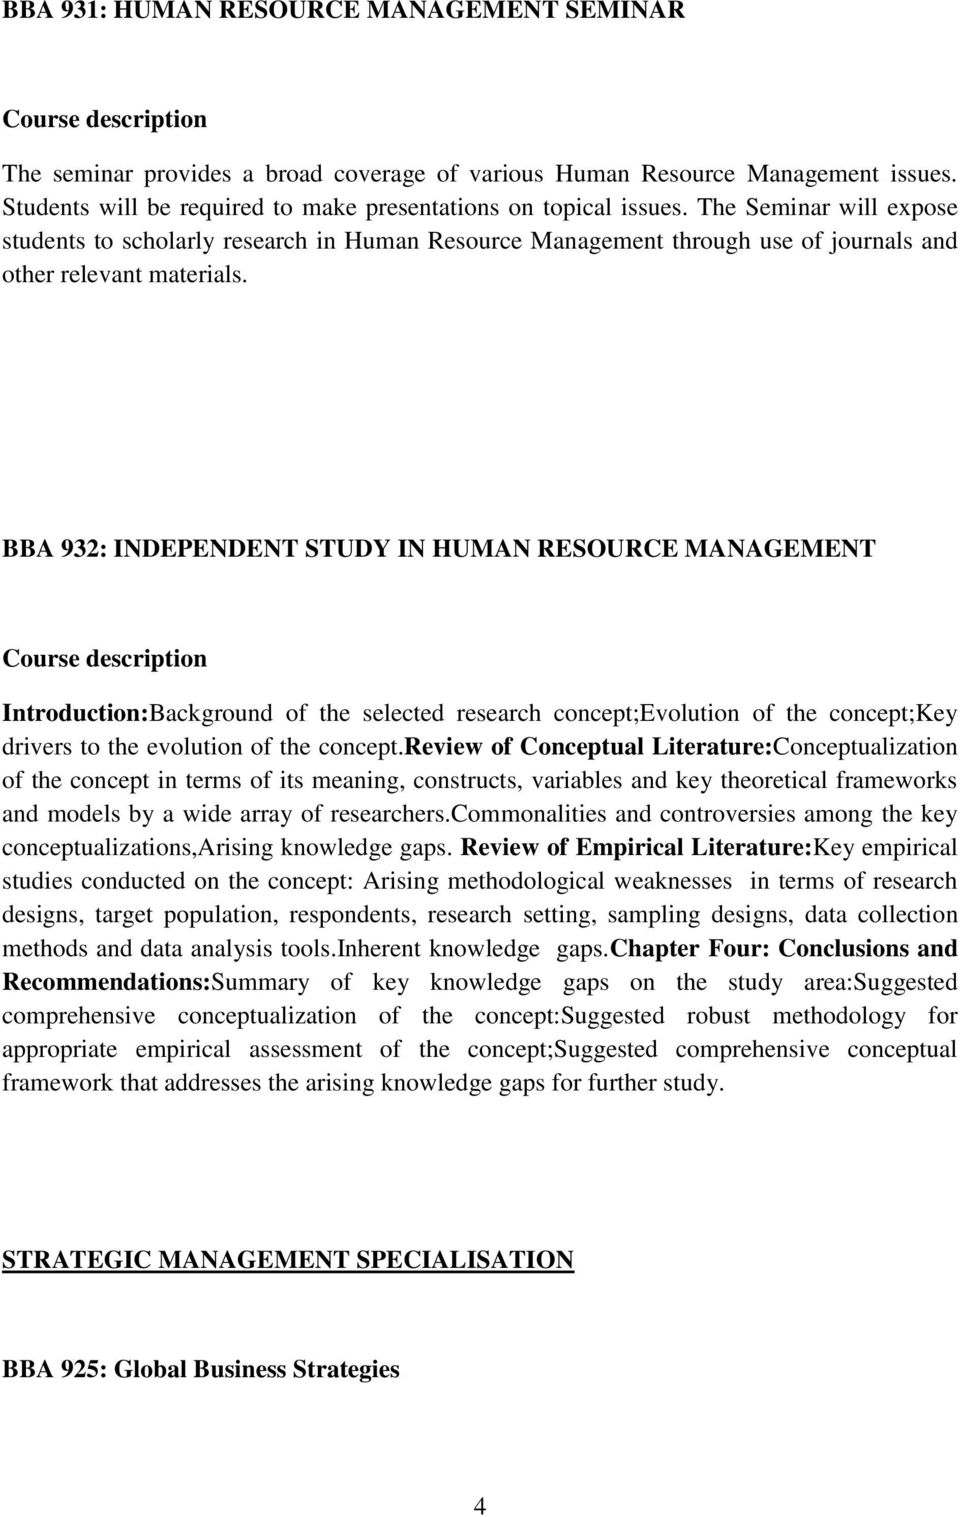 BBA 932: INDEPENDENT STUDY IN HUMAN RESOURCE MANAGEMENT Introduction:Background of the selected research concept;evolution of the concept;key drivers to the evolution of the concept.